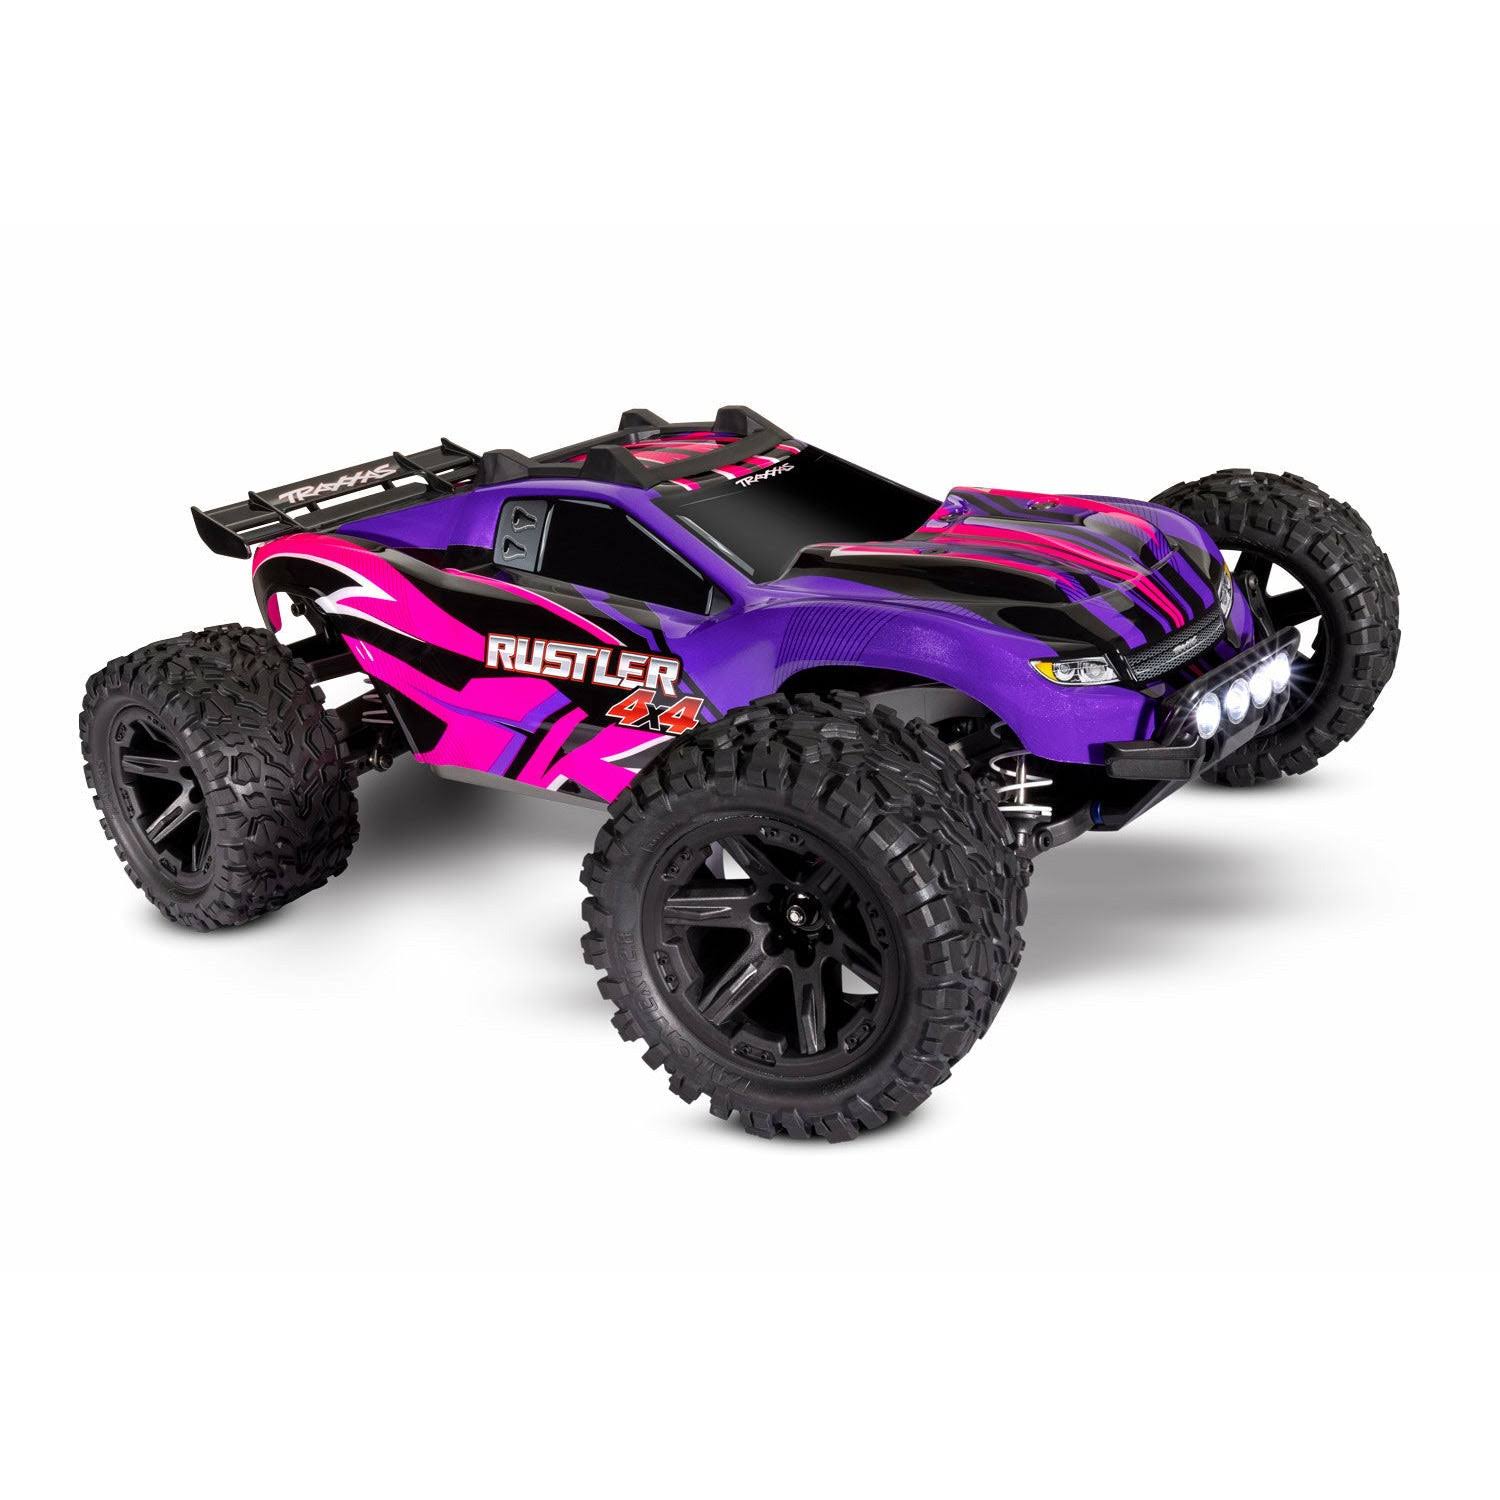 Traxxas 1/10 Rustler 4x4 With LED Lights Pink